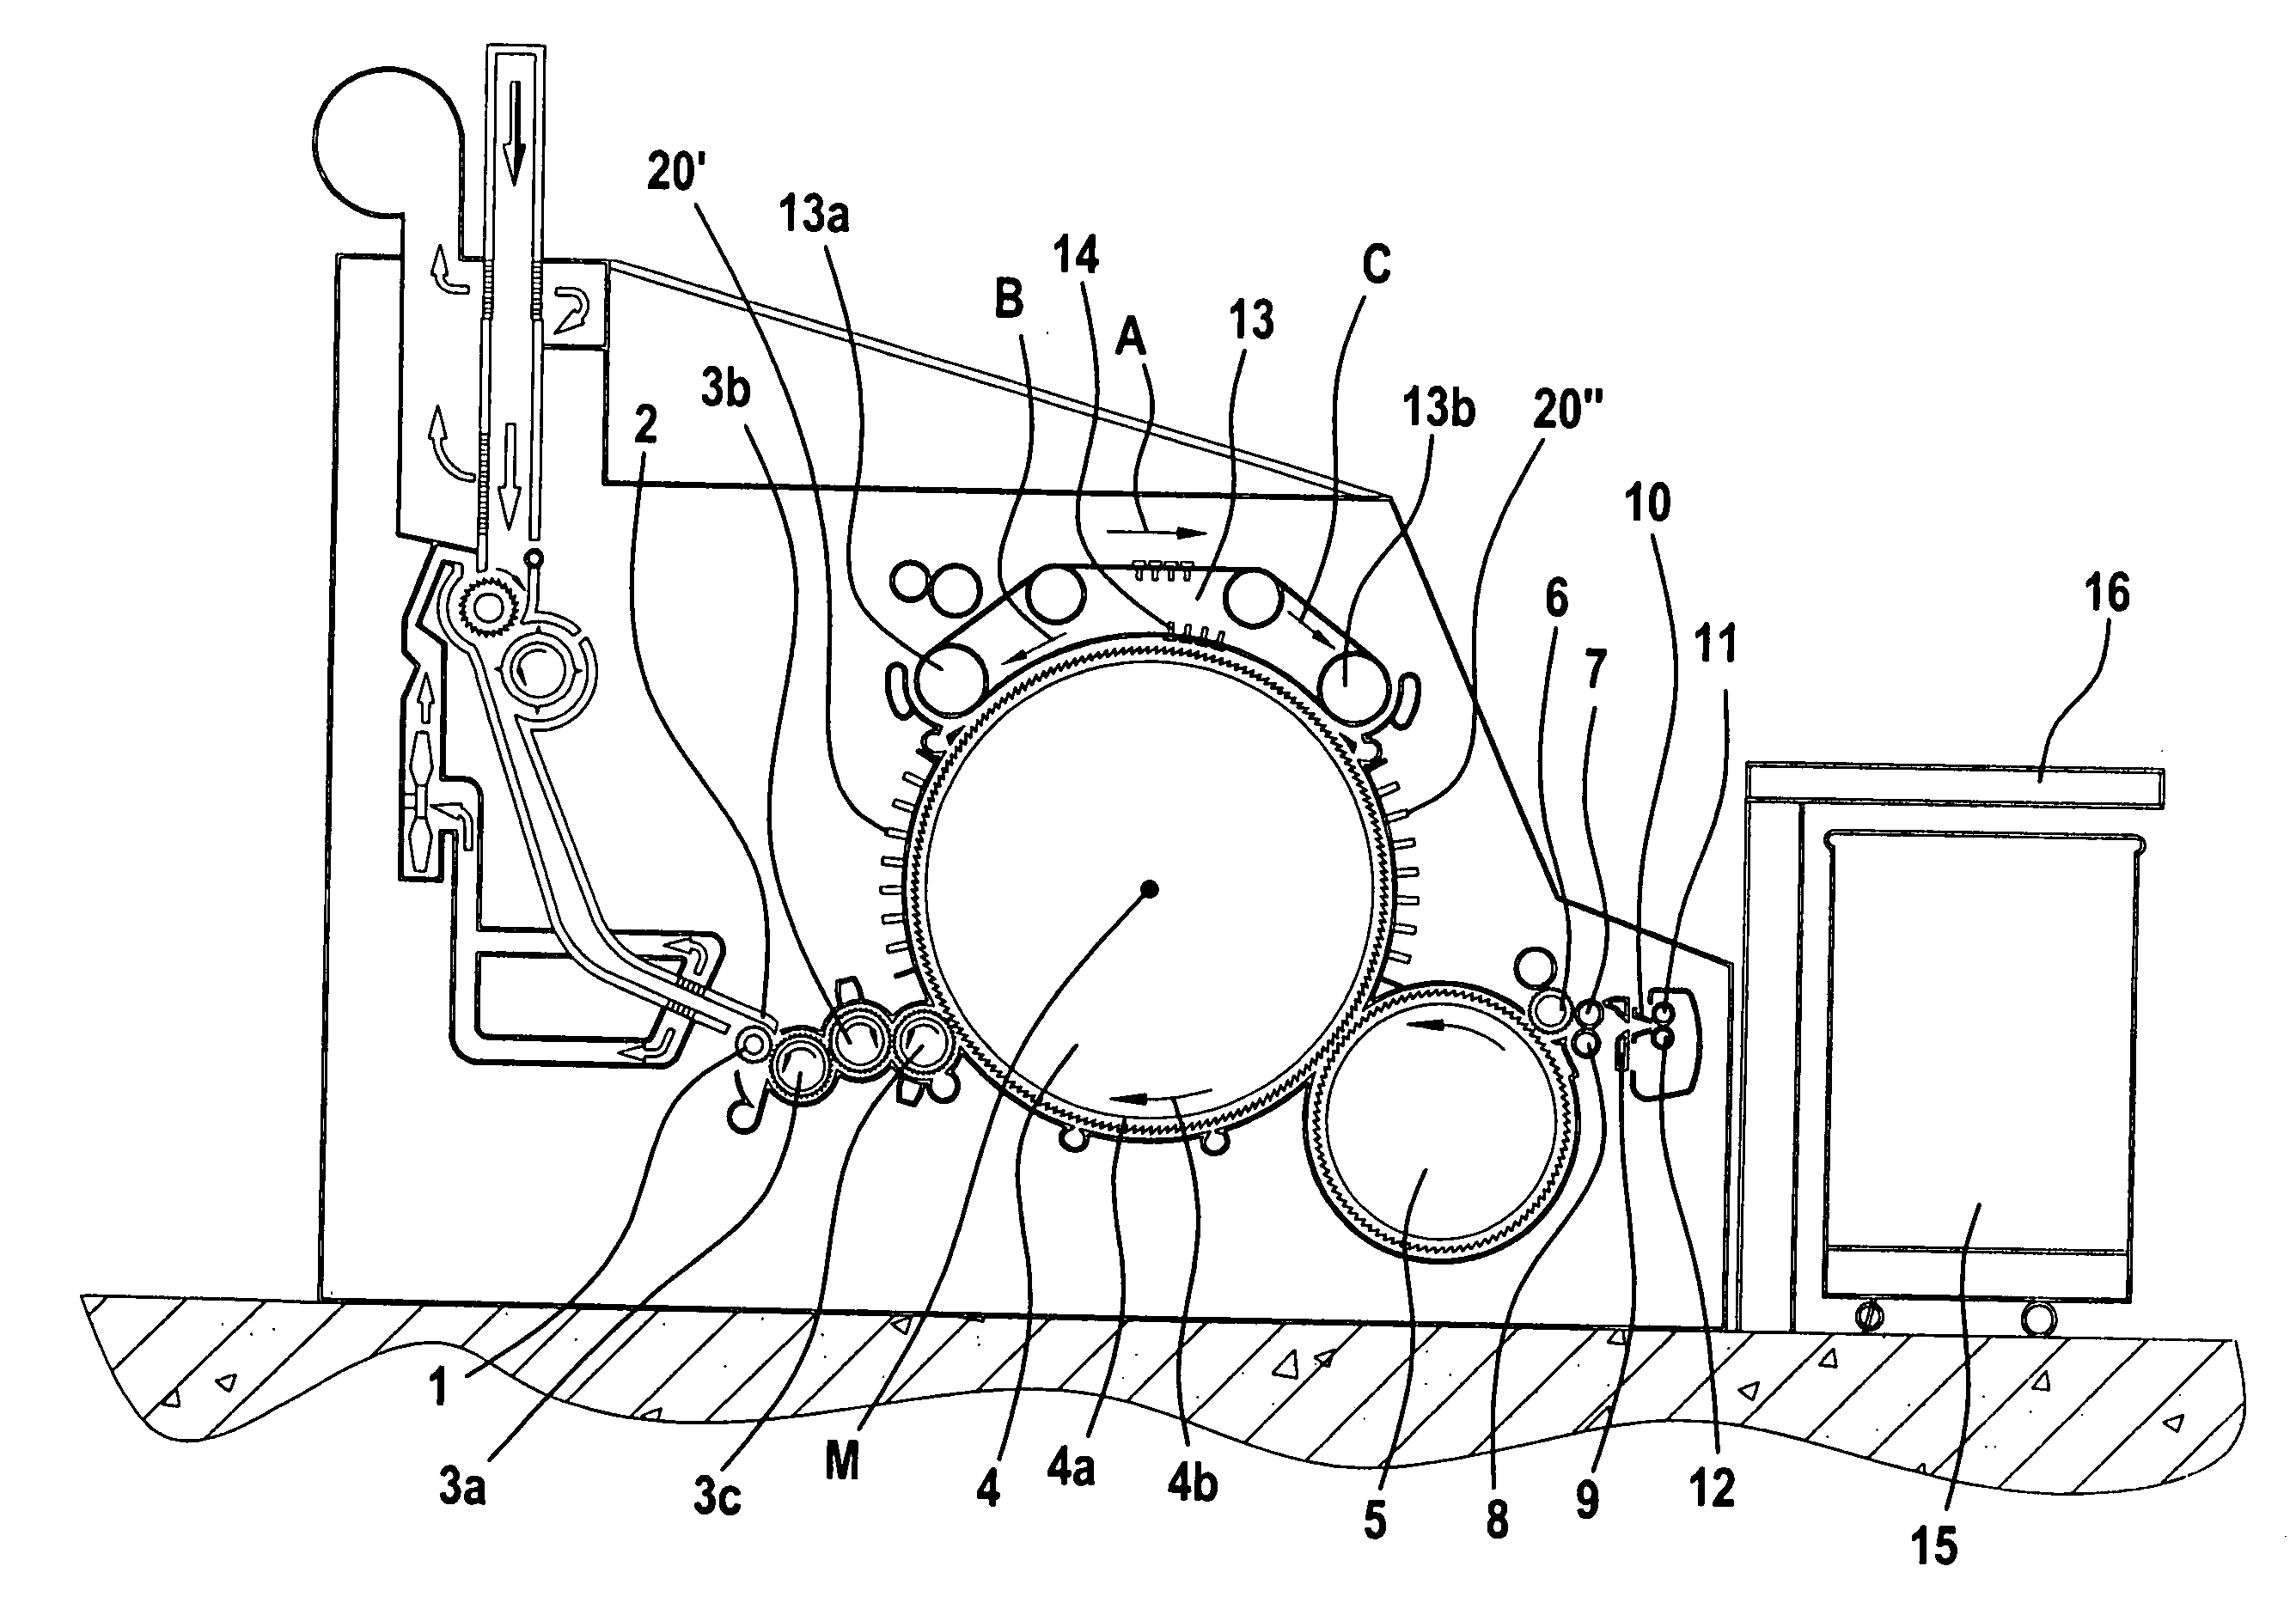 Apparatus at a flat card for cotton, synthetic fibers or the like, having a carding element